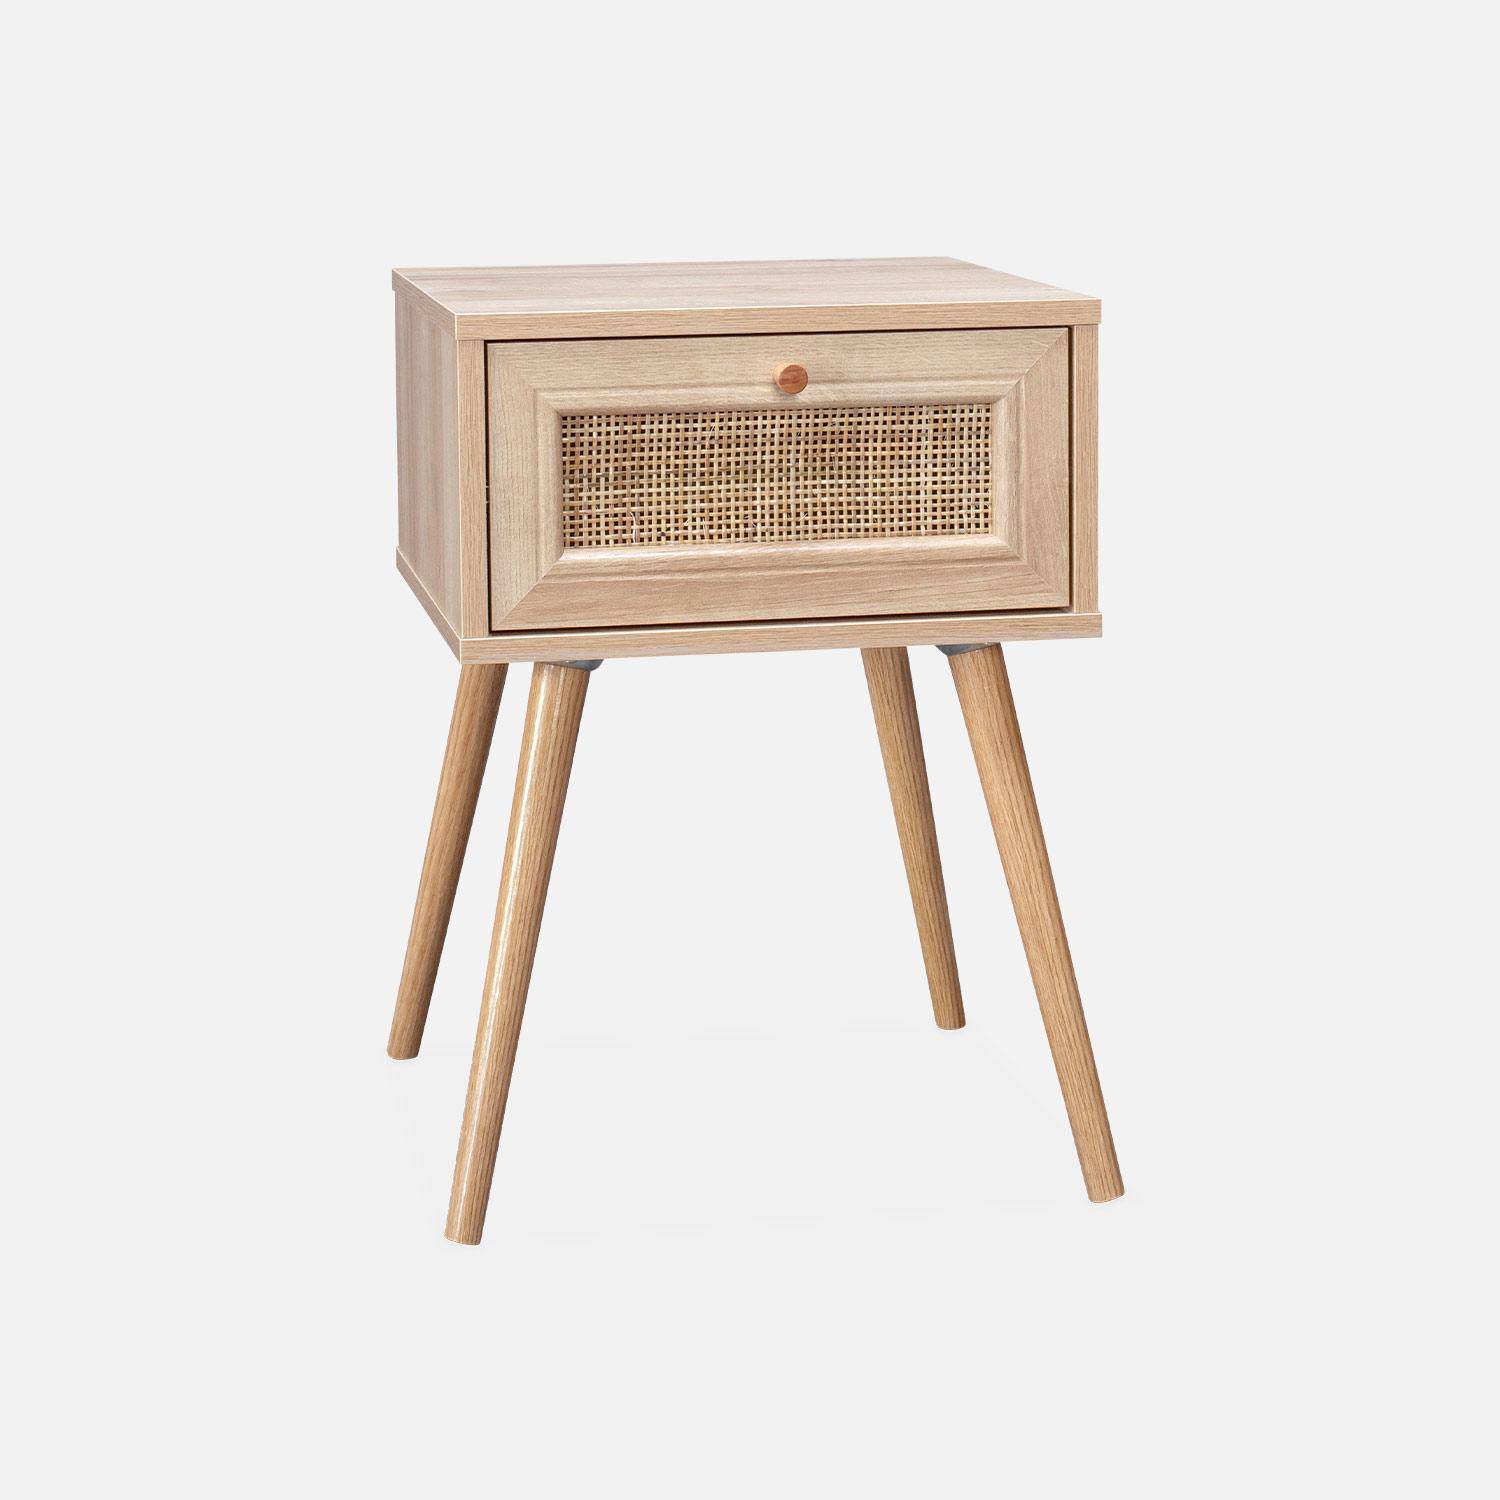 Pair of woven rattan bedside tables with drawer, 39x39x55.4cm - Boheme - Natural Wood colour,sweeek,Photo5